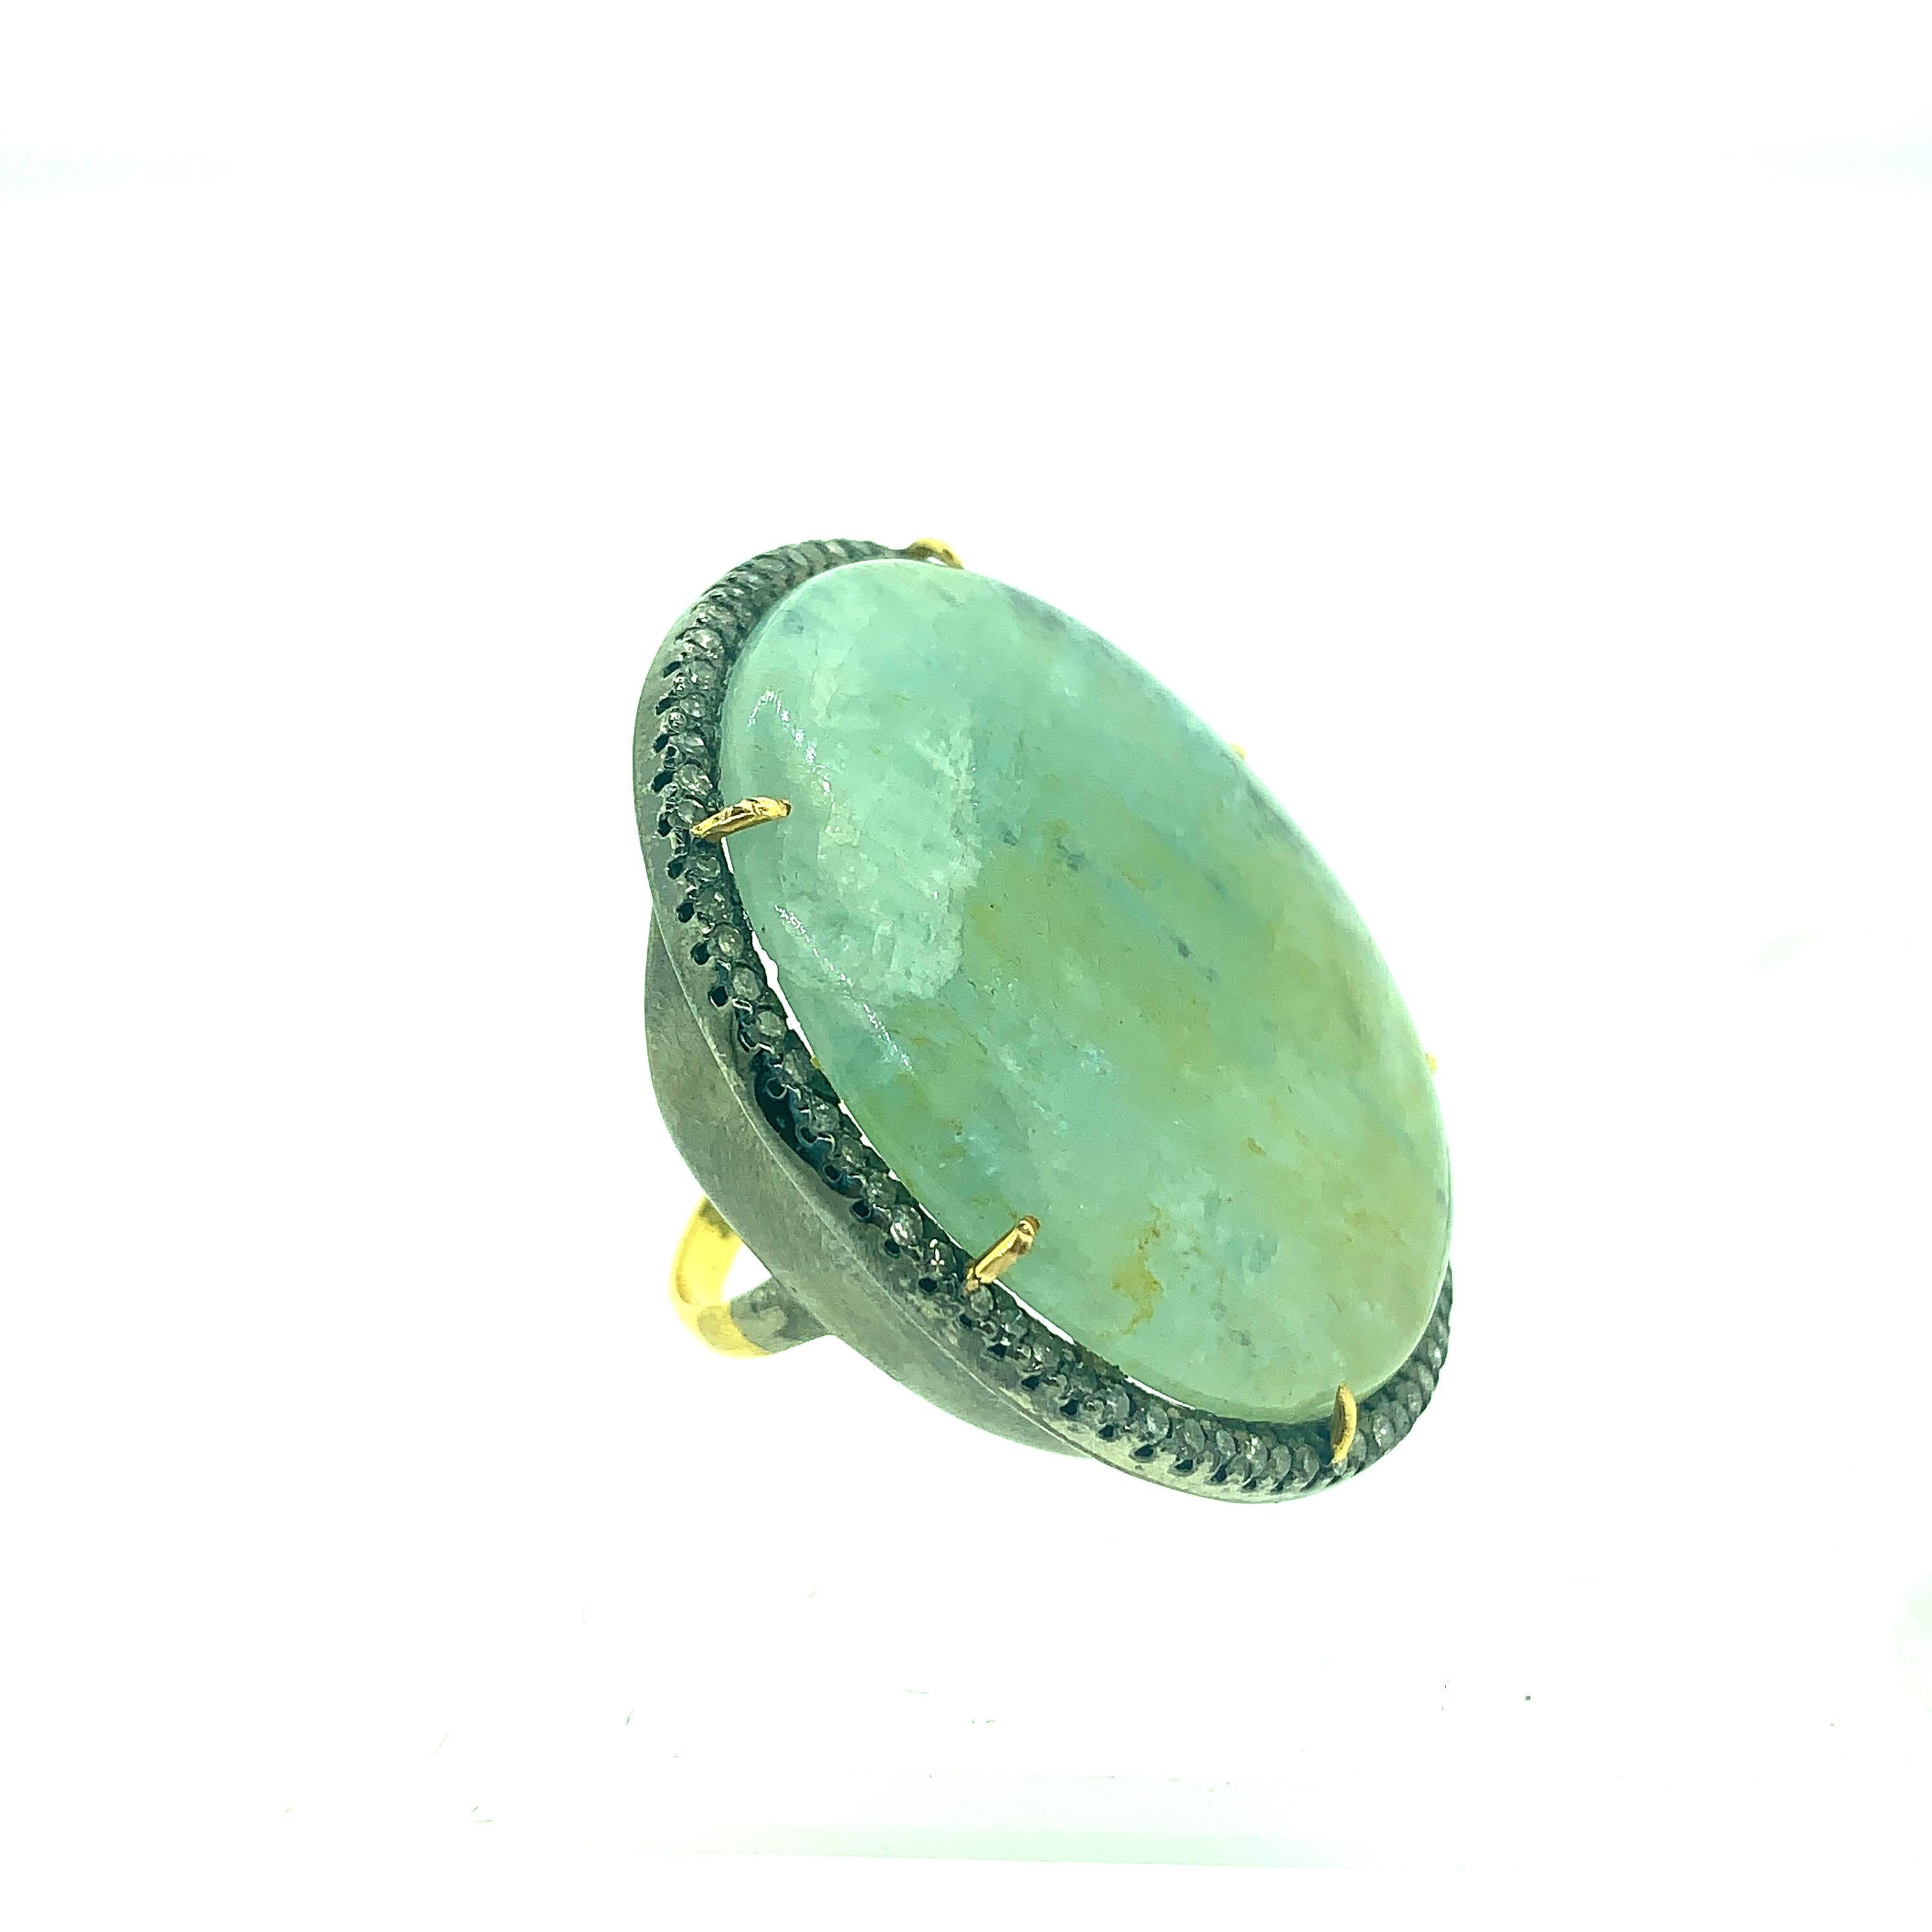 Contemporary 44.10ct Aquamarine, 0.70ct Diamond Ring in Oxidized Sterling Silver and 18K Gold